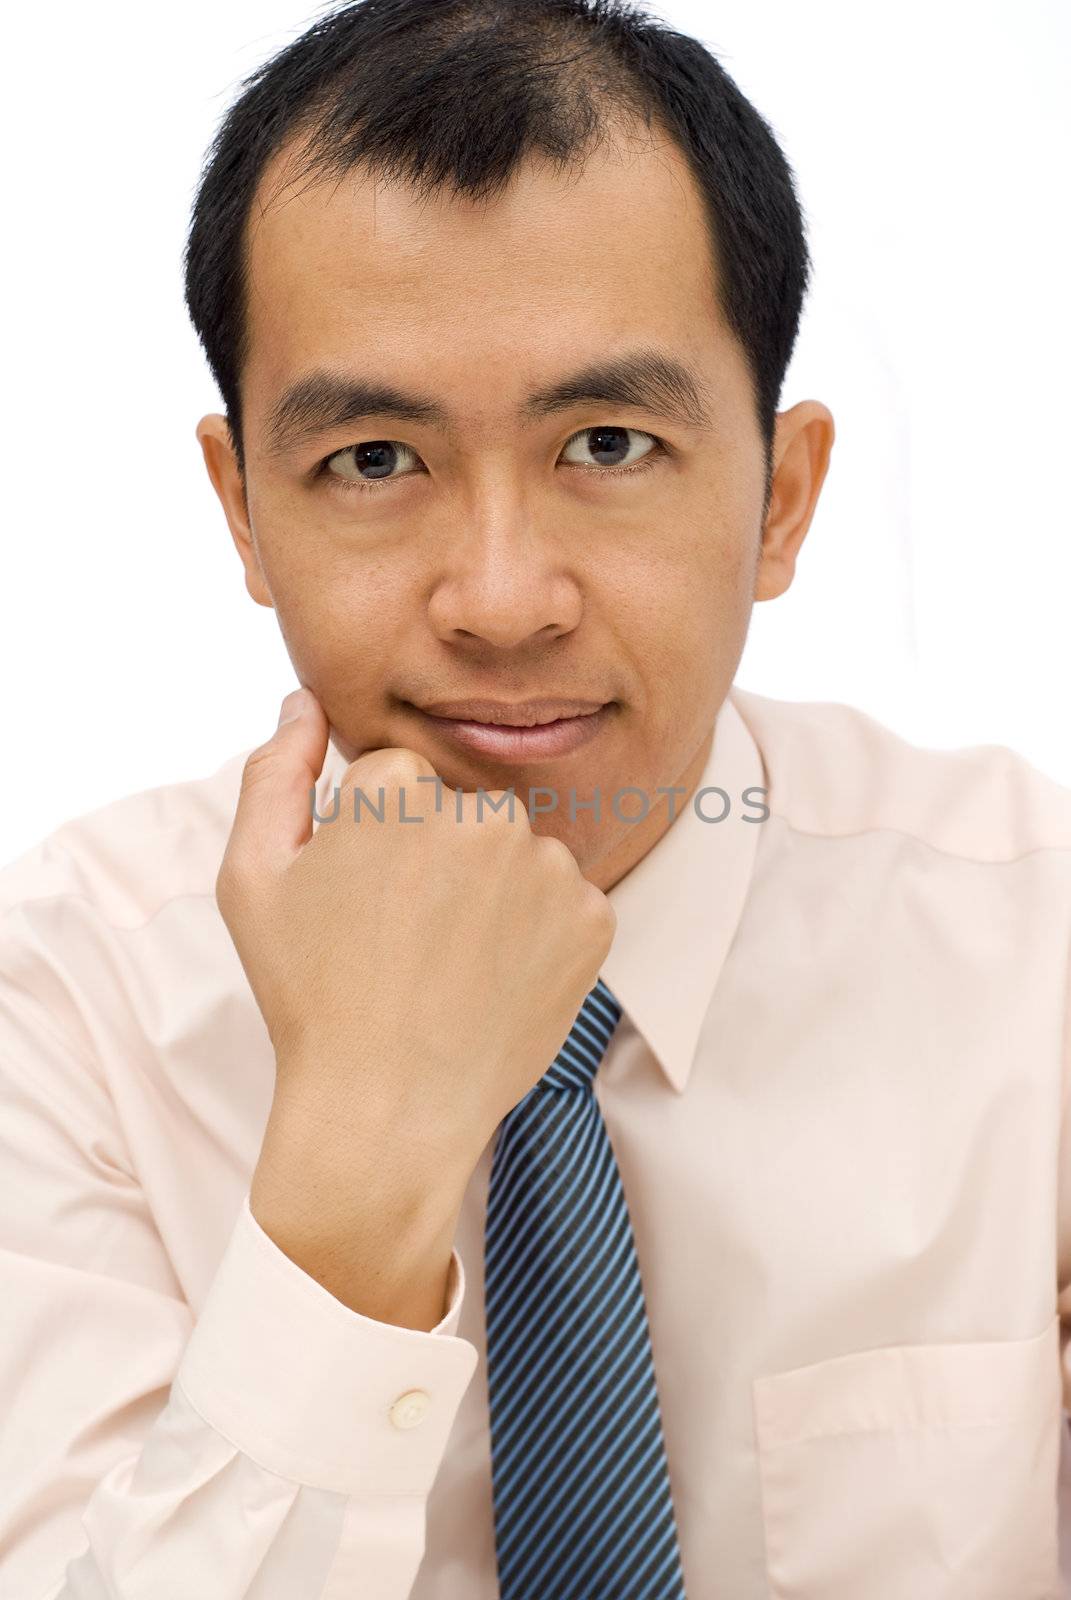 Mature businessman portrait of Asian on white background.